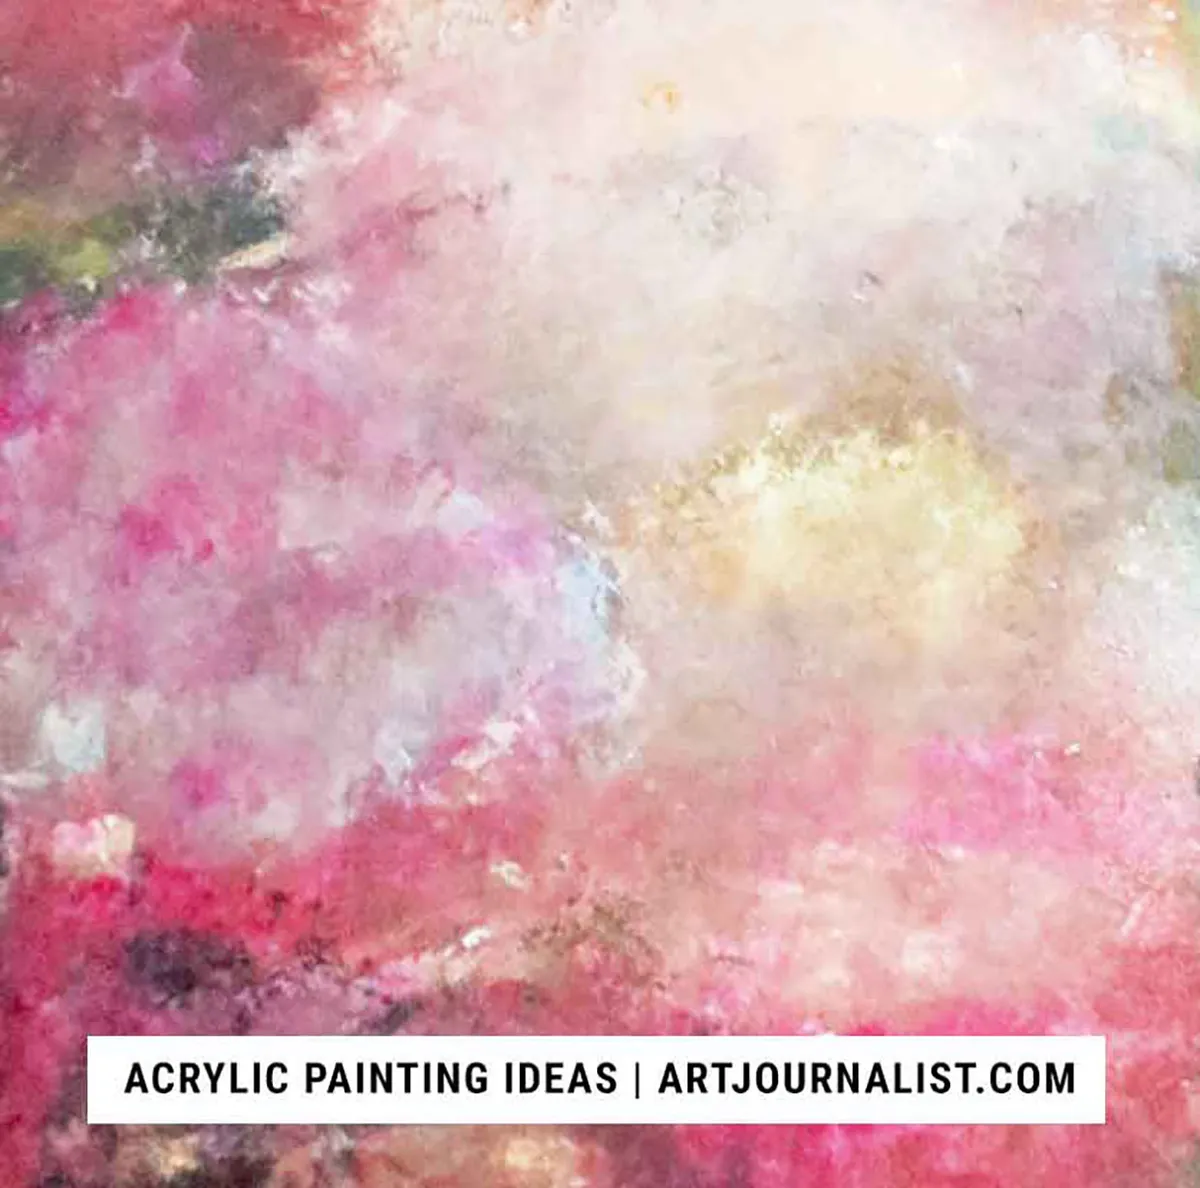 Easy acrylic painting ideas – smudging